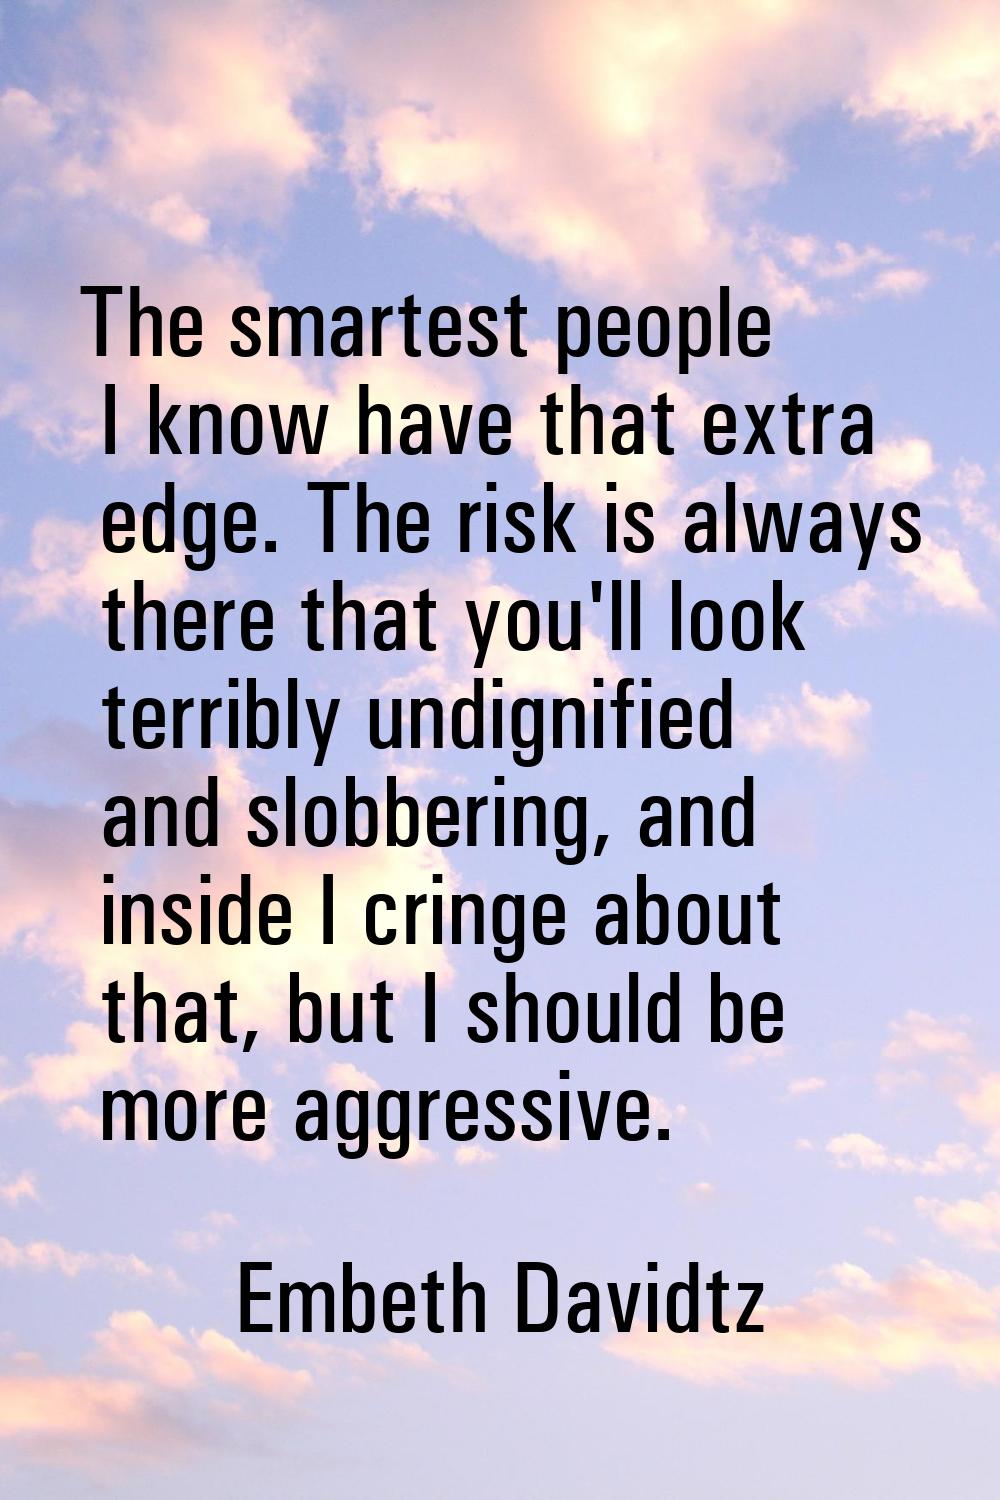 The smartest people I know have that extra edge. The risk is always there that you'll look terribly